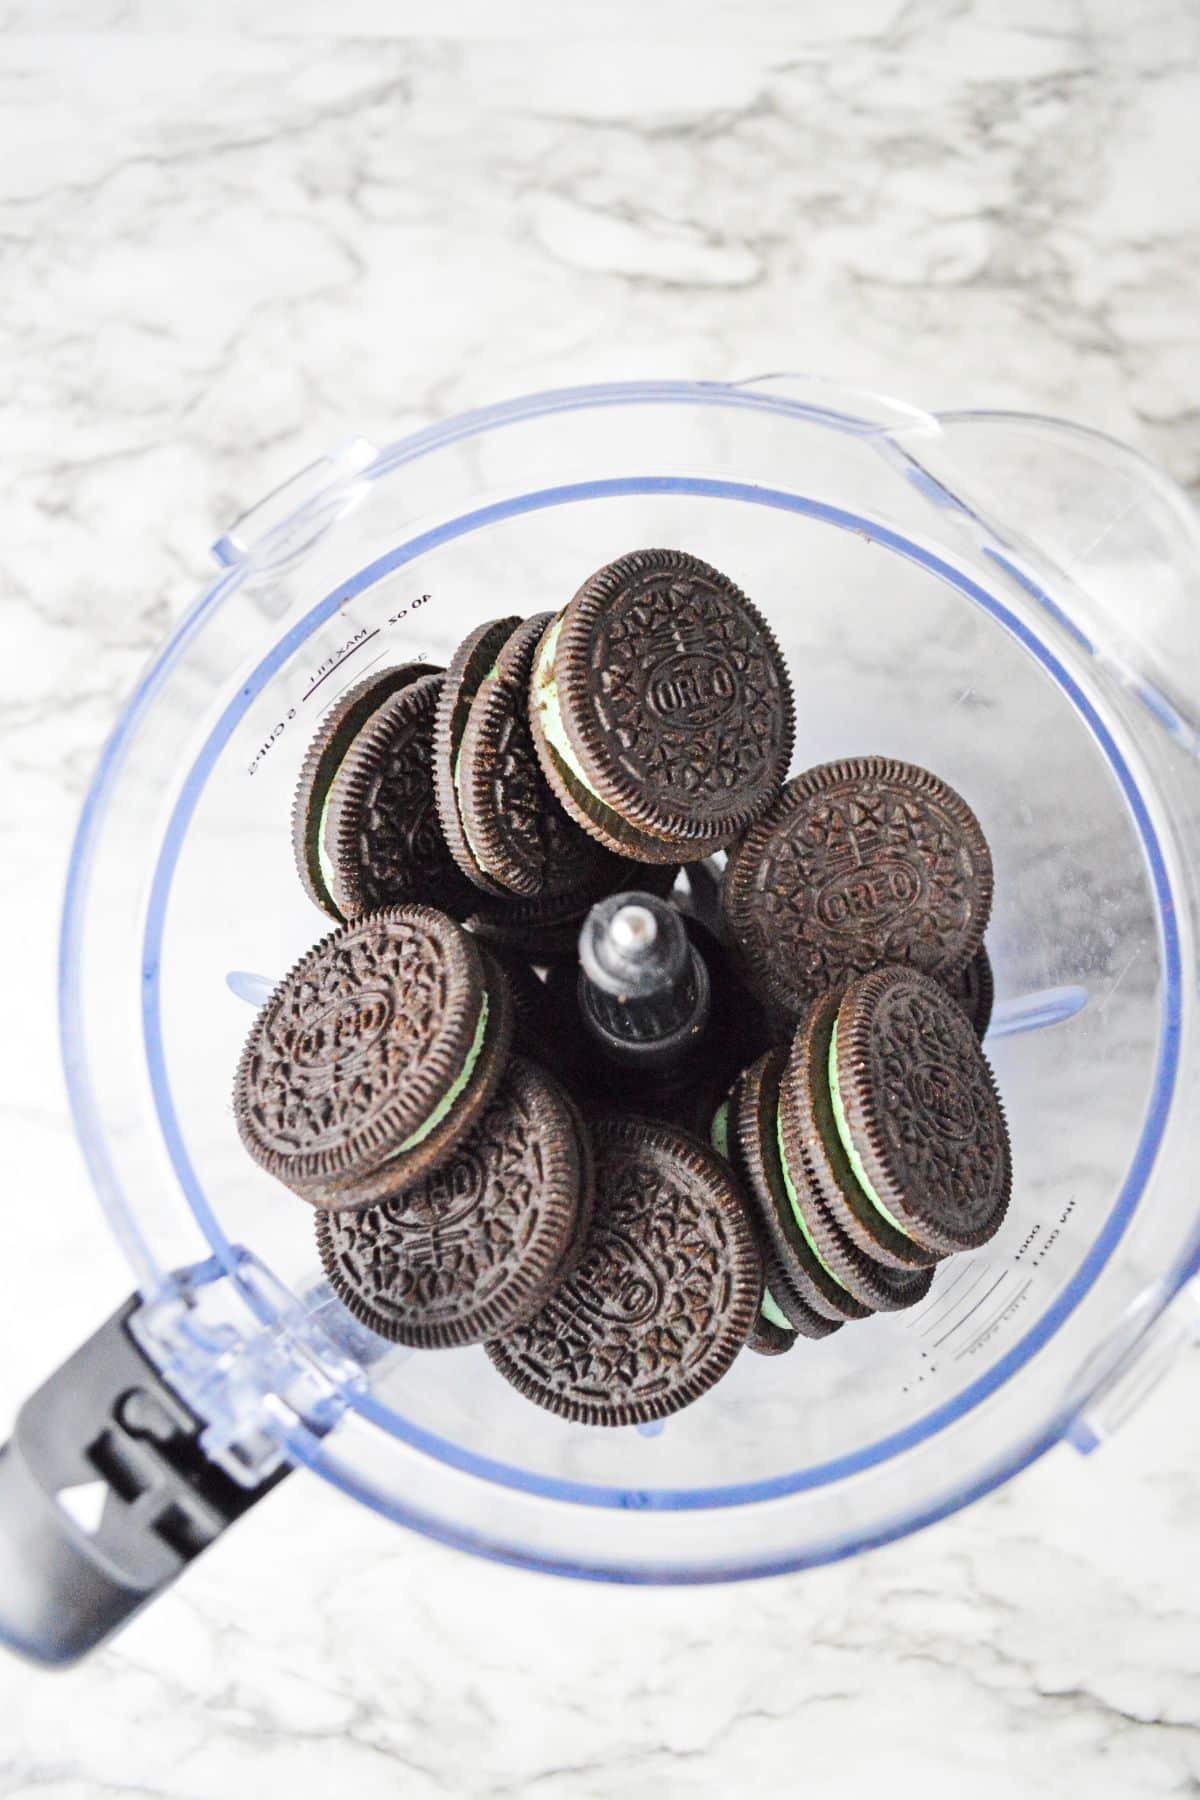 mint Oreo cookies in a food processor